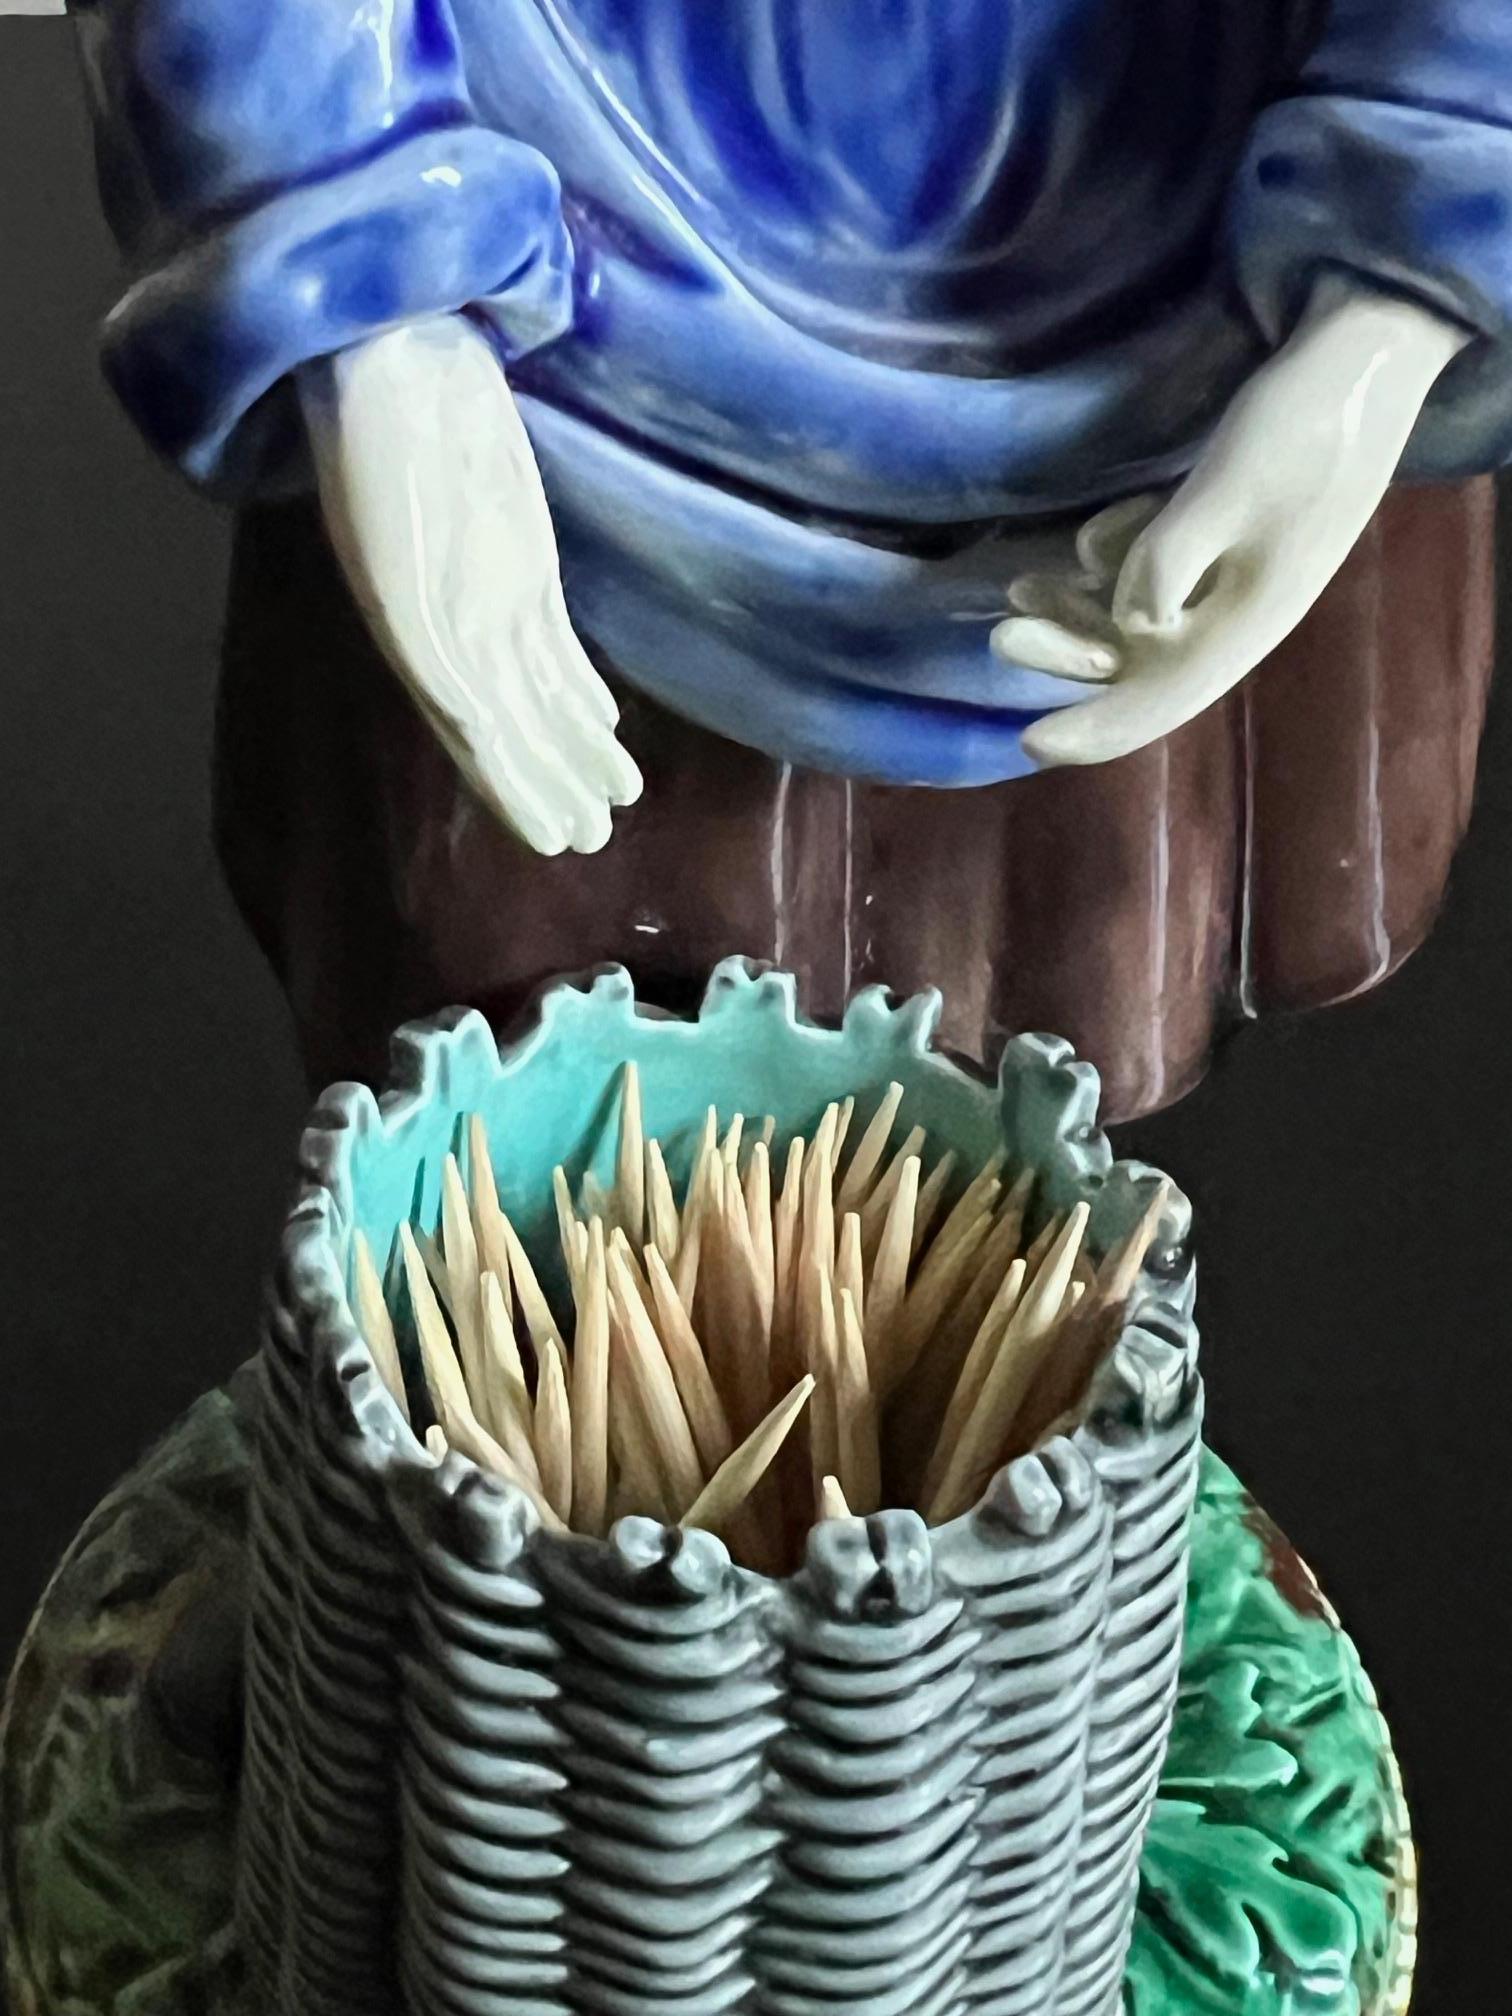 Antique majolica figure with a basket made in England by Wedgwood in 1873. She is a fisherwoman wearing traditional clothing, bent over a turquoise lined basket, it is pattern M 1210.


